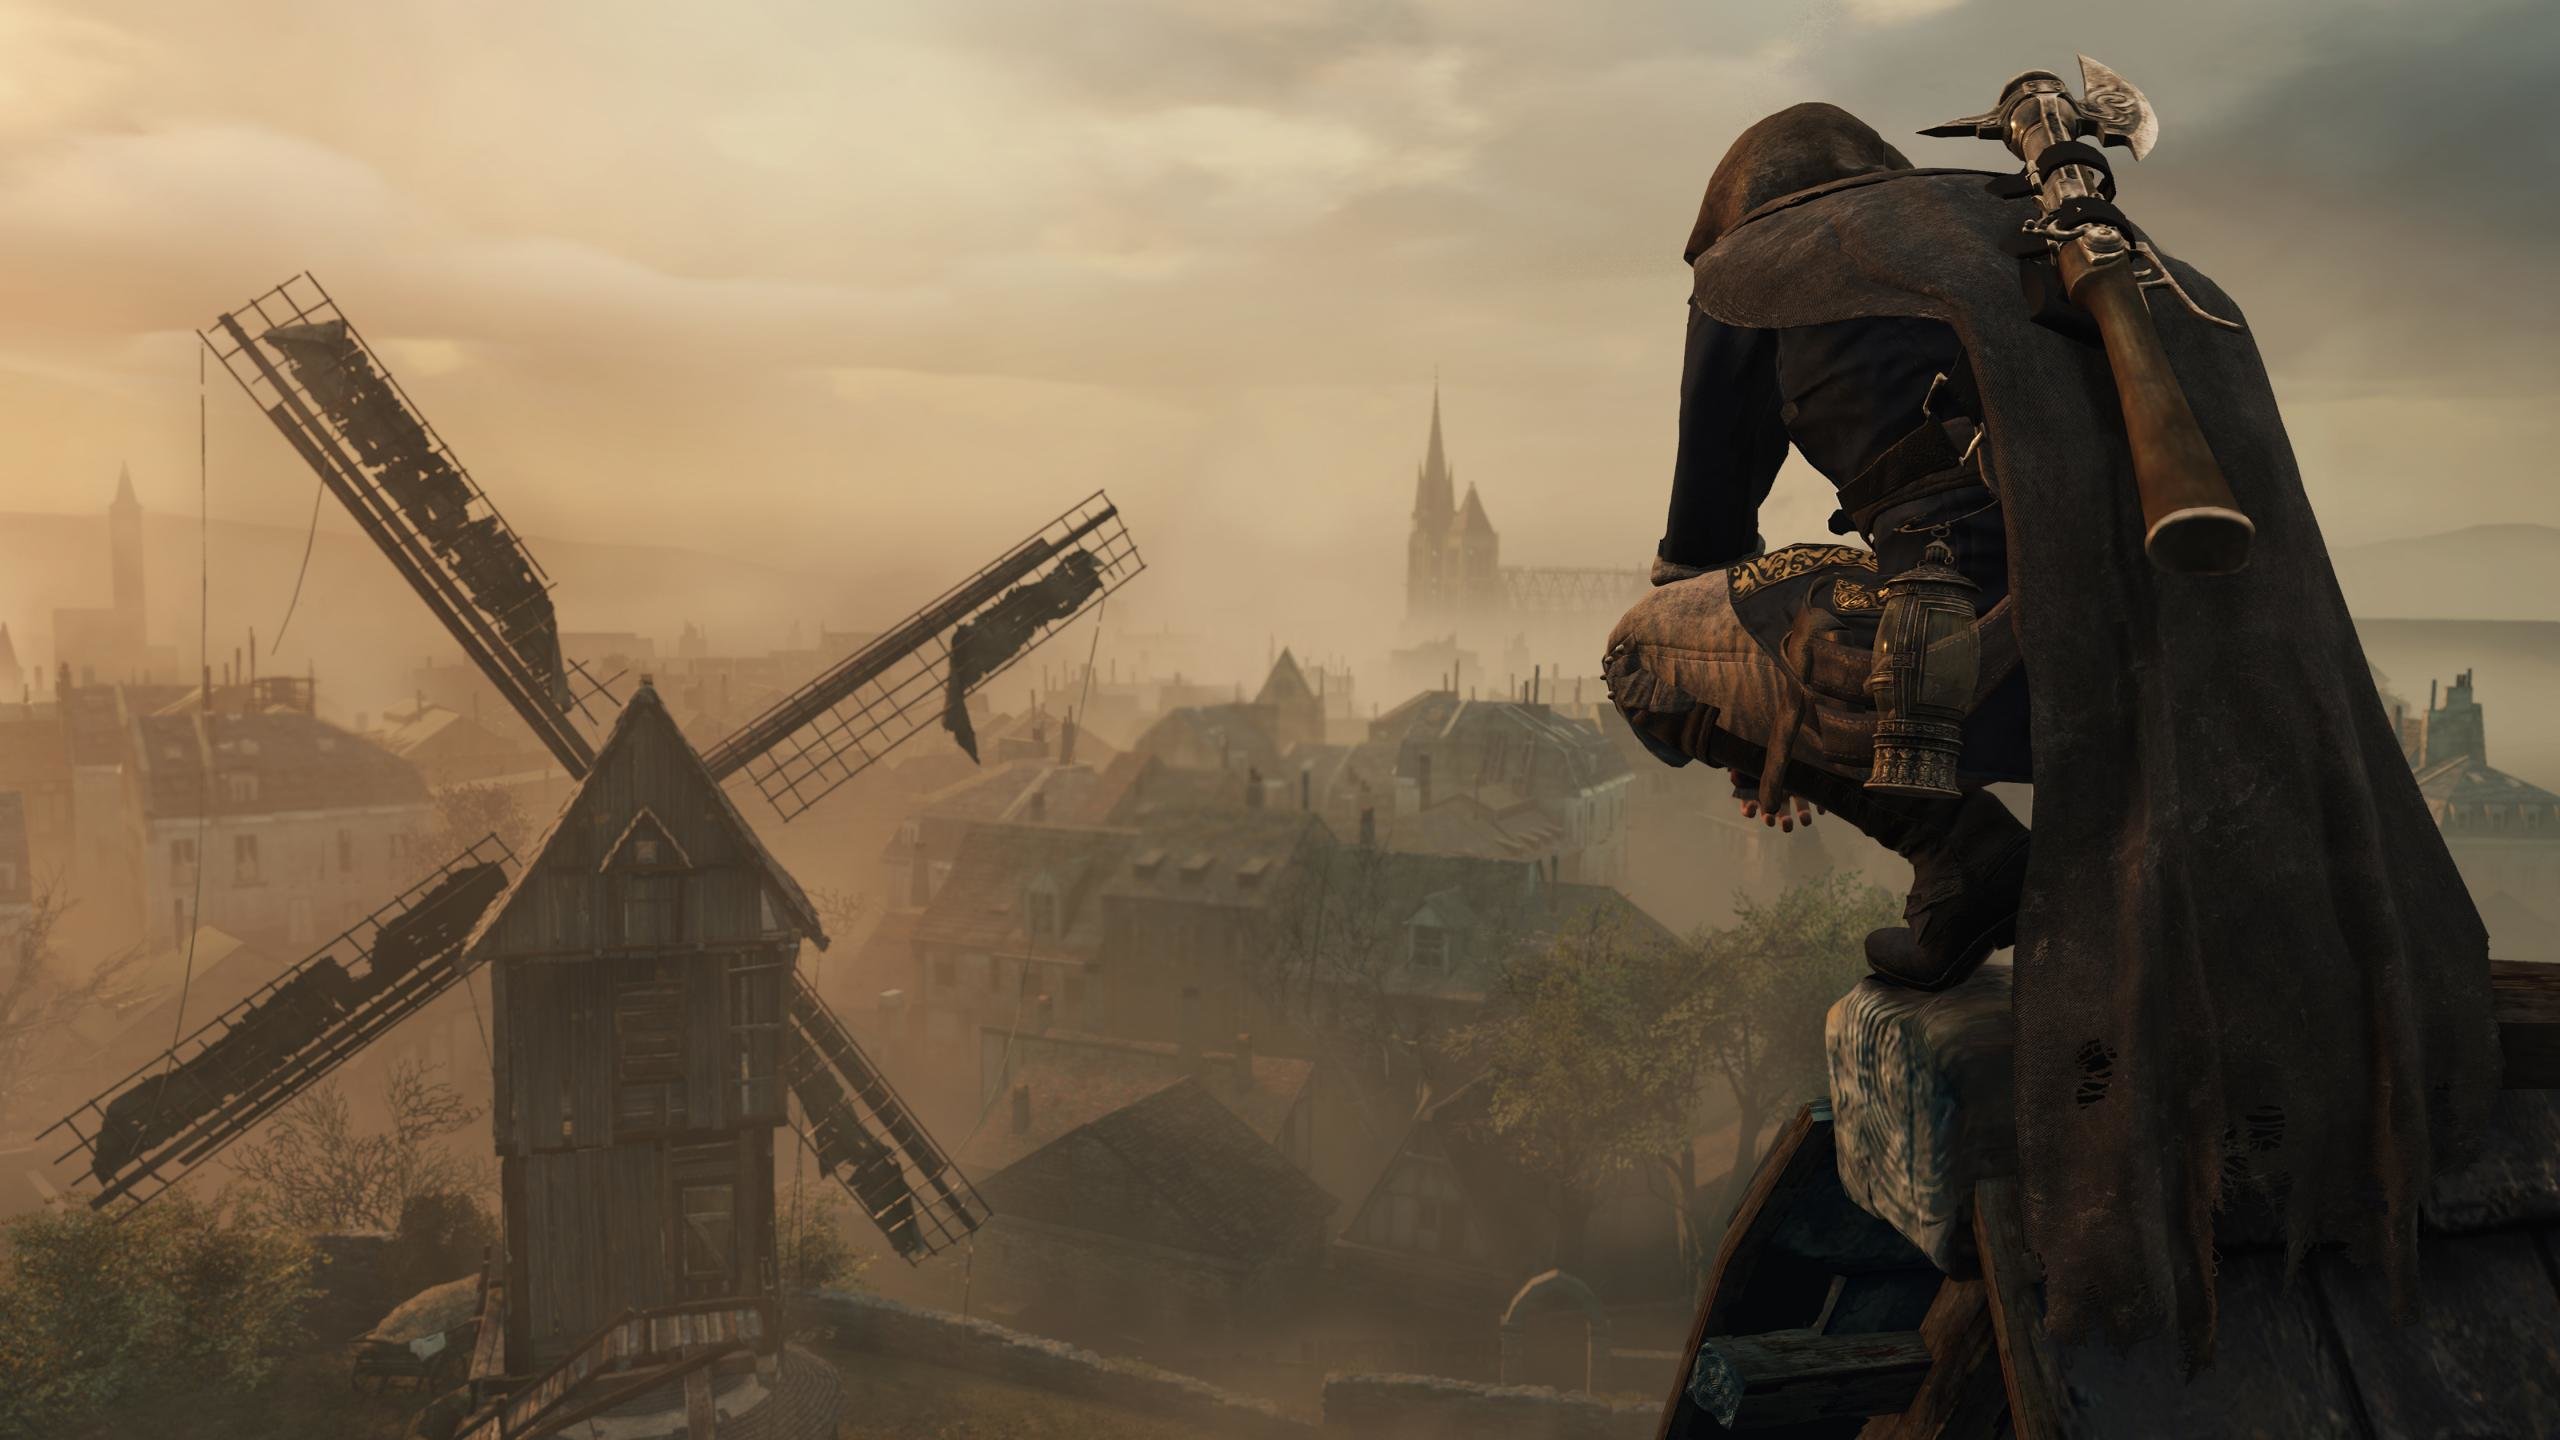 Awesome Assassin's Creed: Unity free wallpaper ID:229469 for hd 2560x1440 desktop